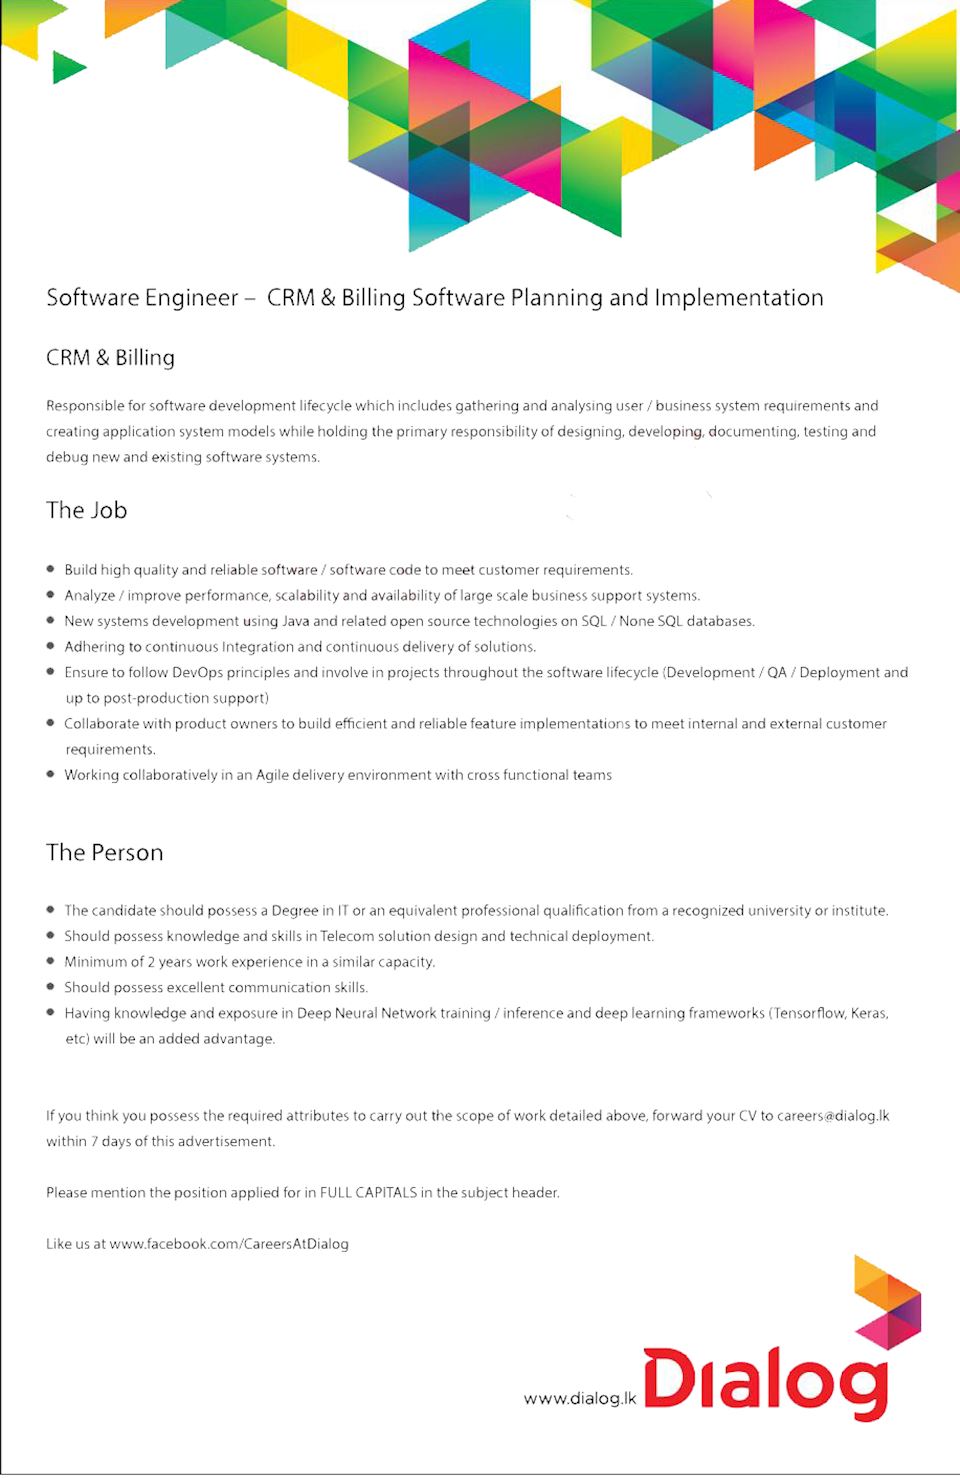 Software Engineer CRM & Billing Software Planning and Implementation